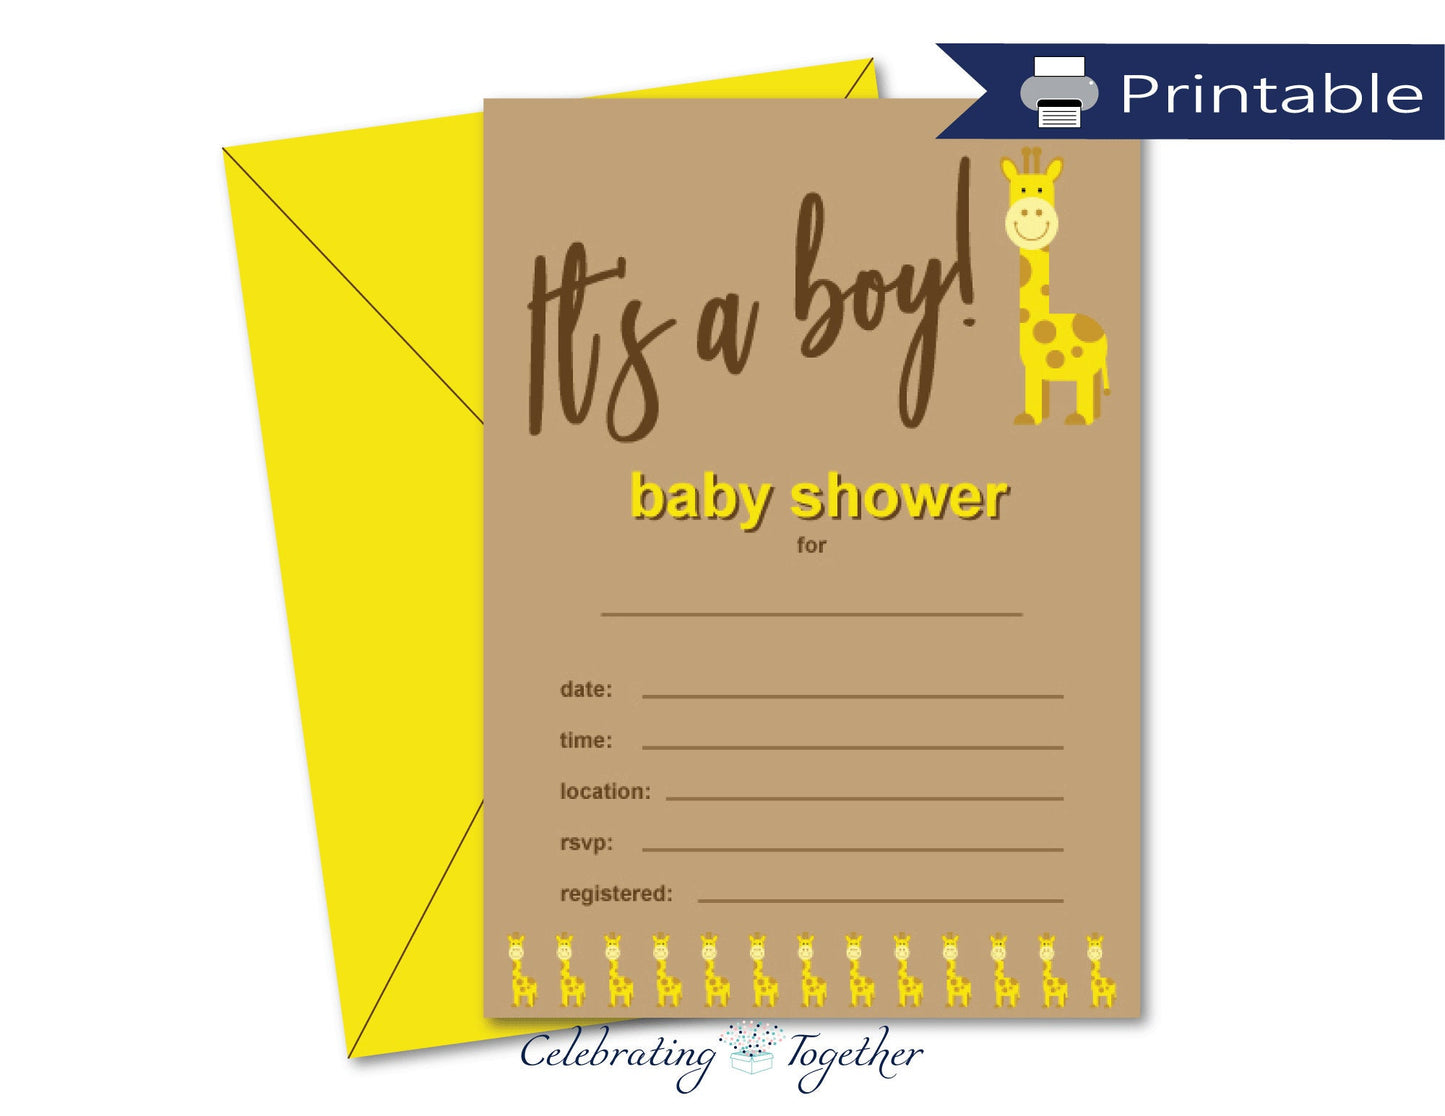 printable its a boy giraffe baby shower invitations - Celebrating Together